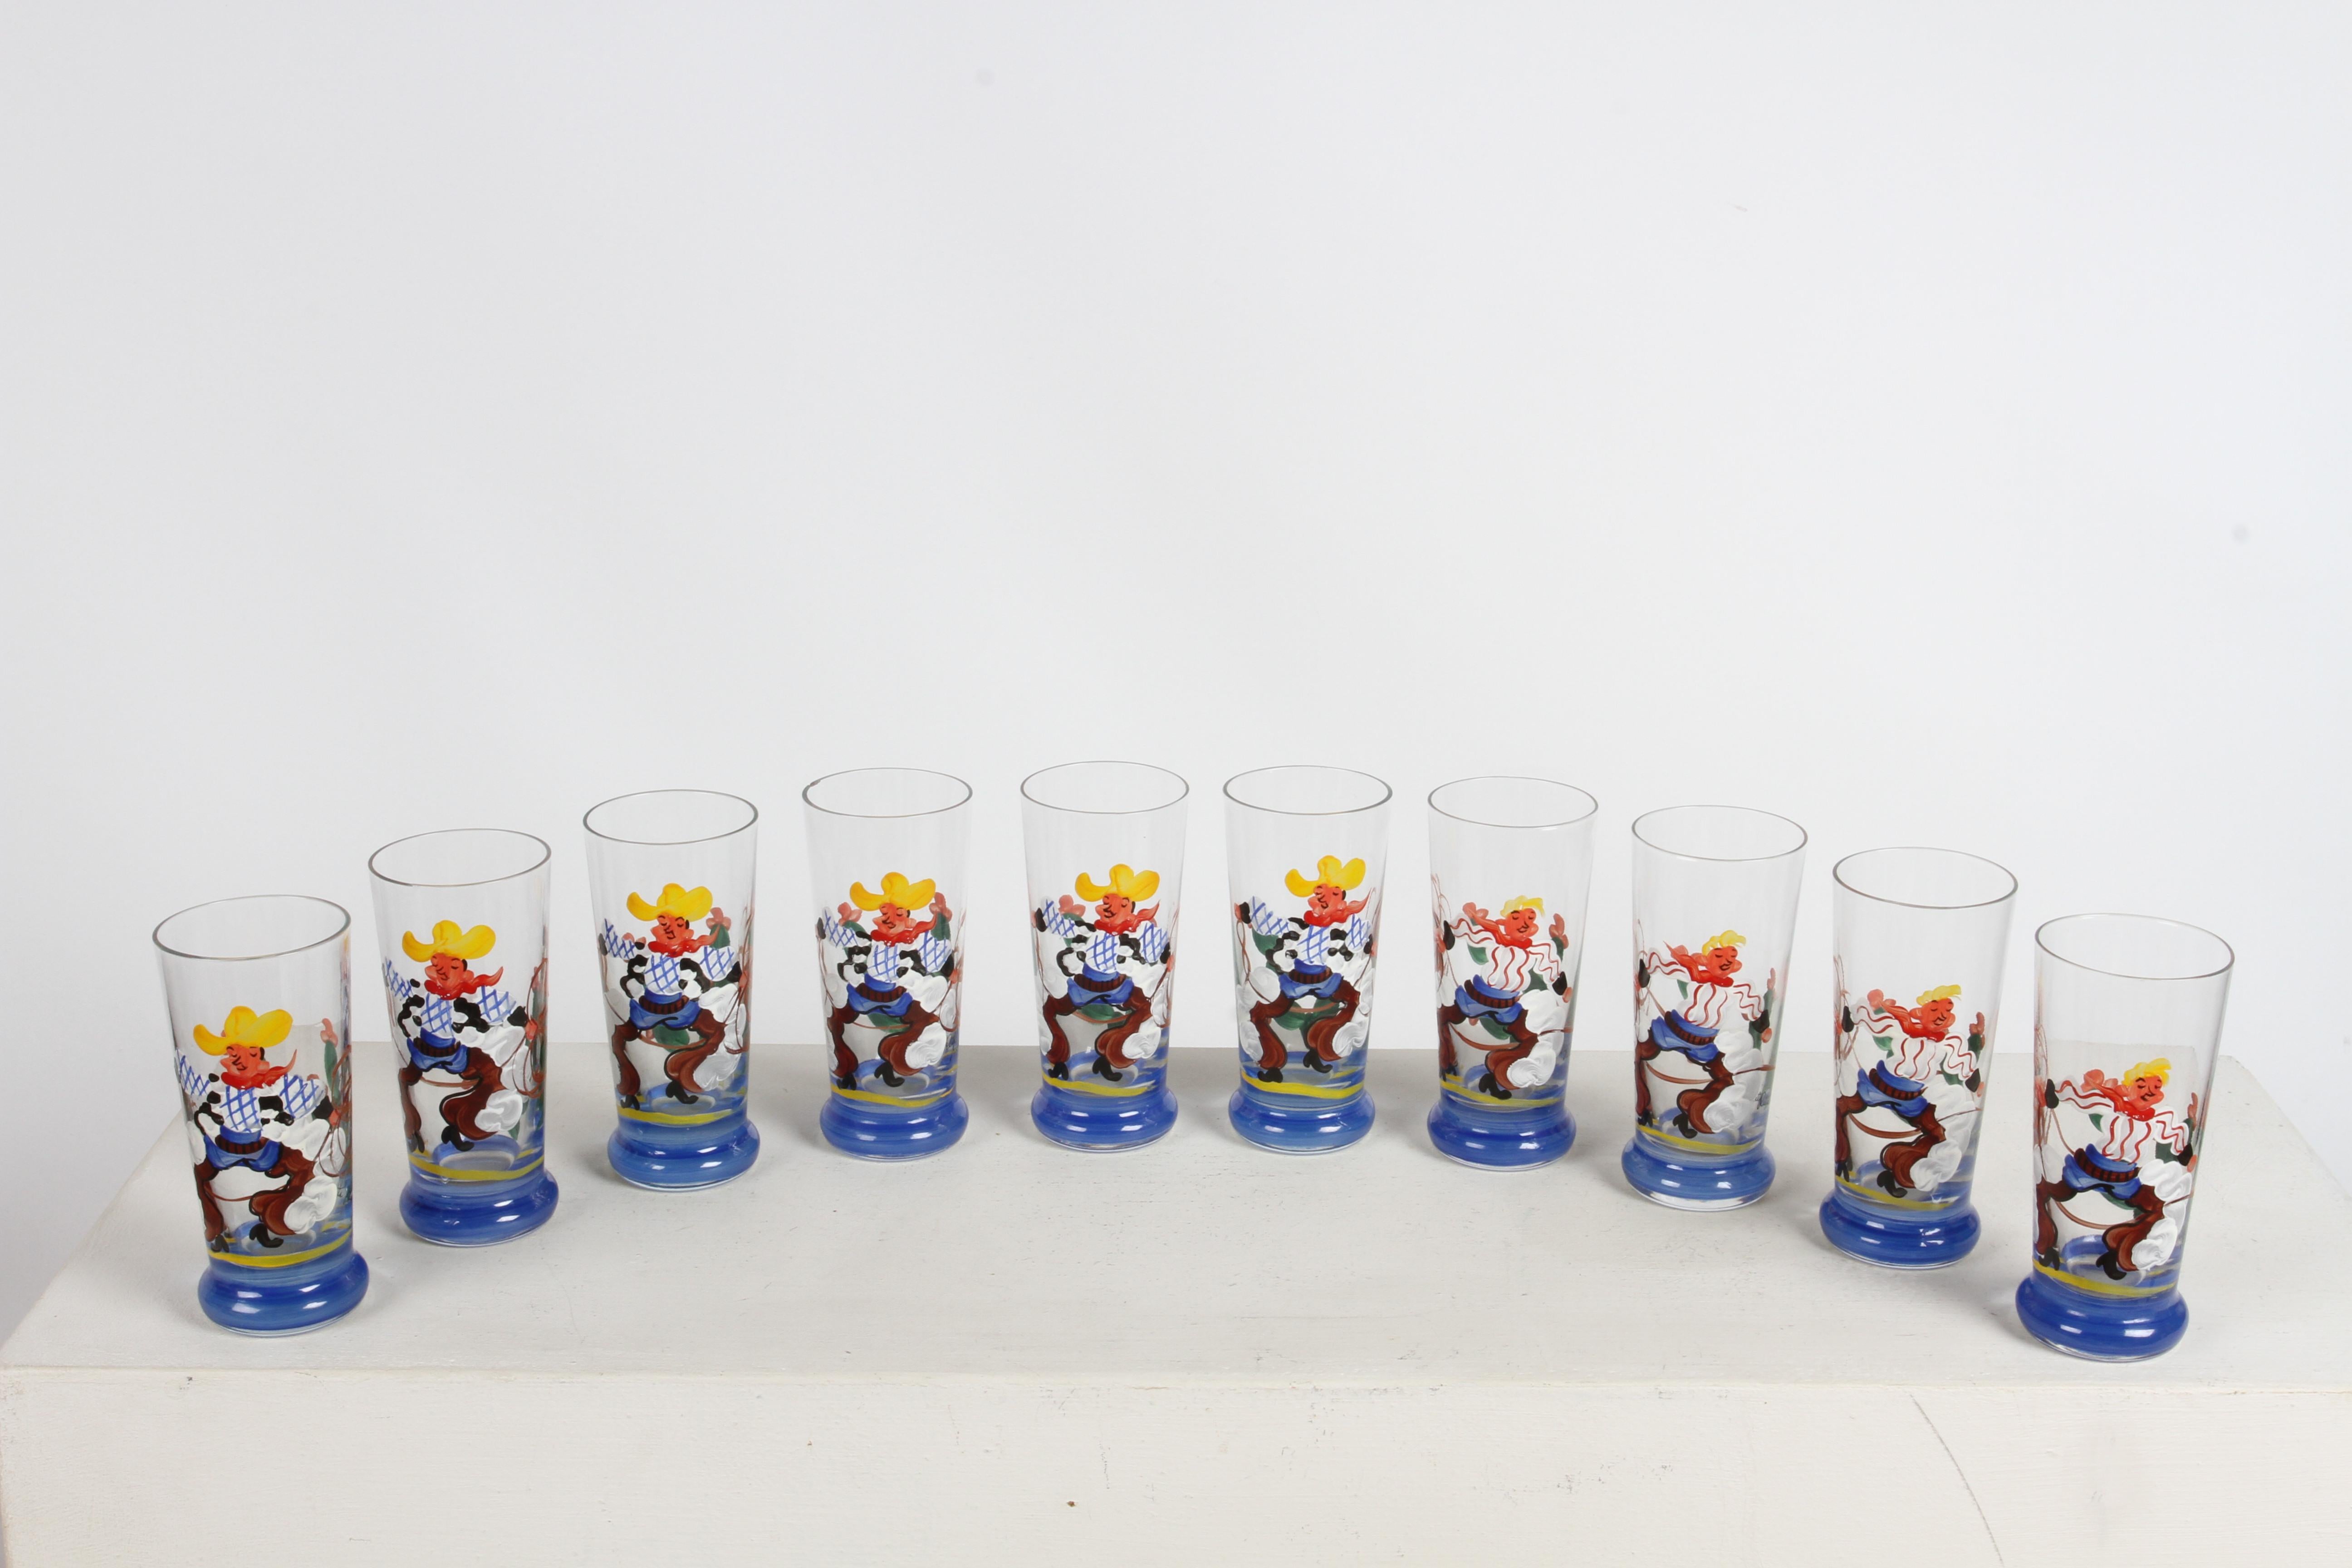 Classic set of 10, 1940s pilsner beer, cocktail or soft drink bar glasses, hand-painted & signed by the artist Rita with western theme of a Cowboy in chaps with lasso, yellow cowboy hat & cactus background. 6 glasses with cowboy in yellow hat , 4